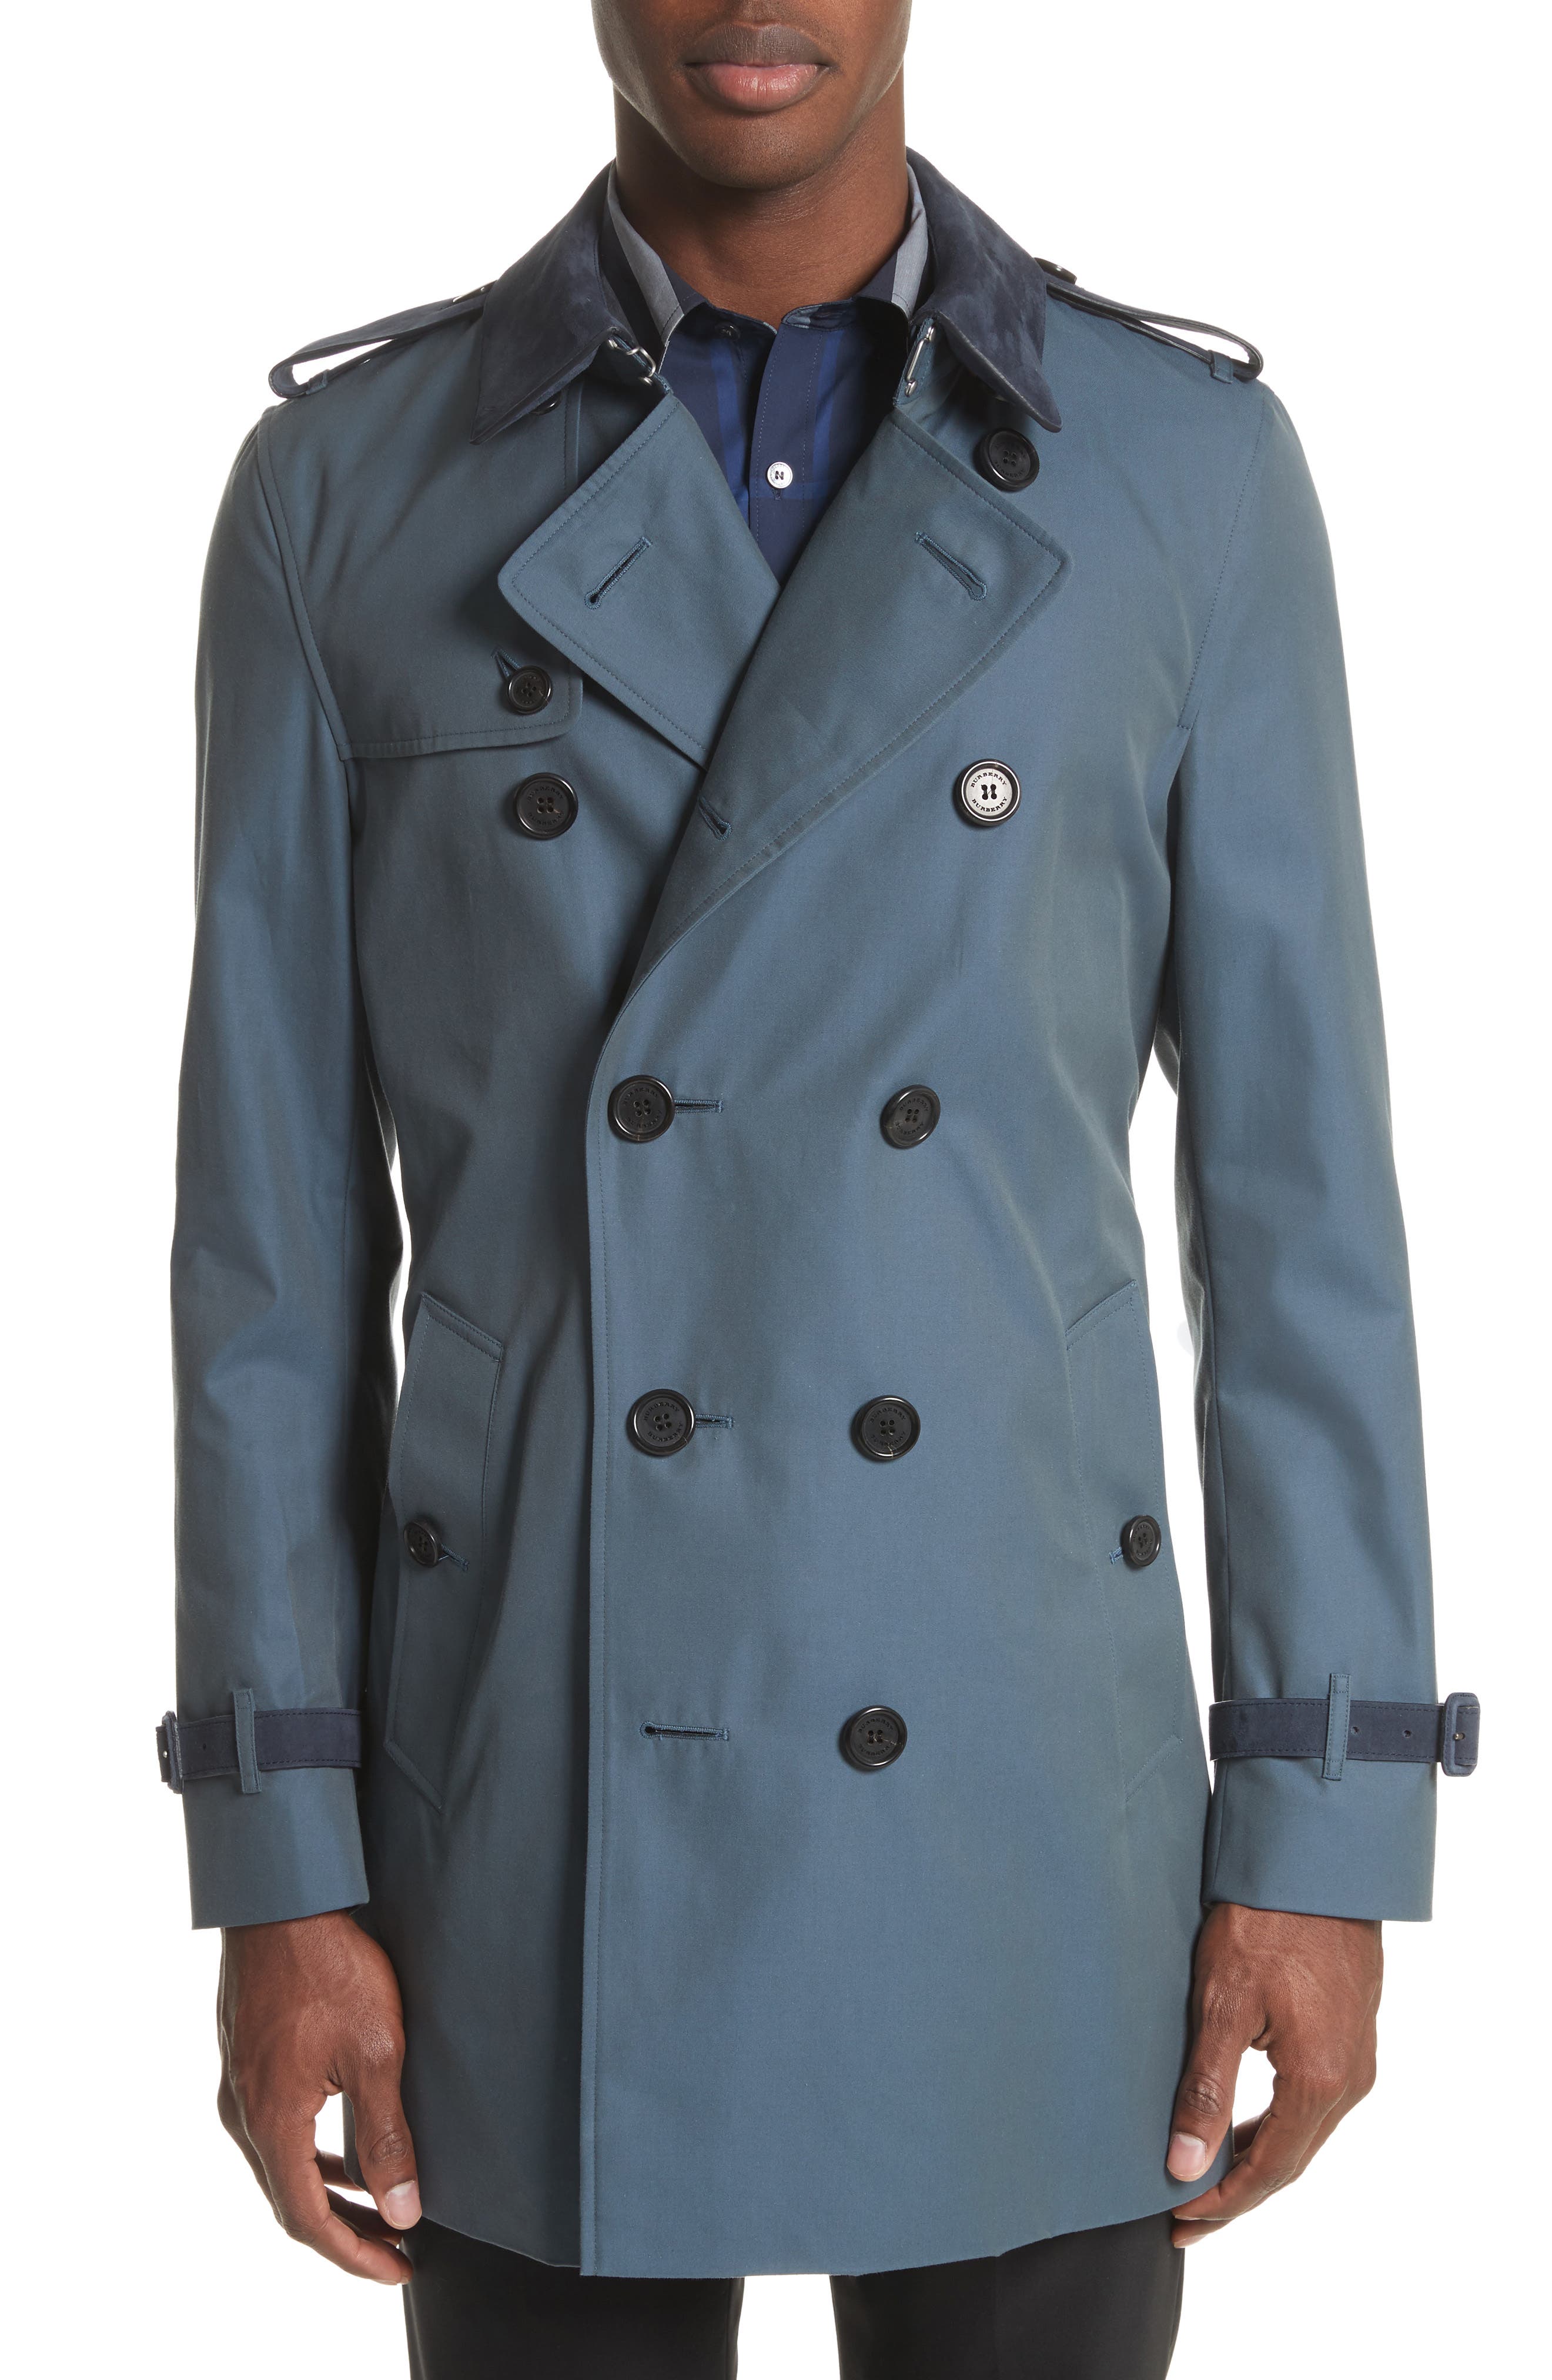 burberry kensington double breasted trench coat